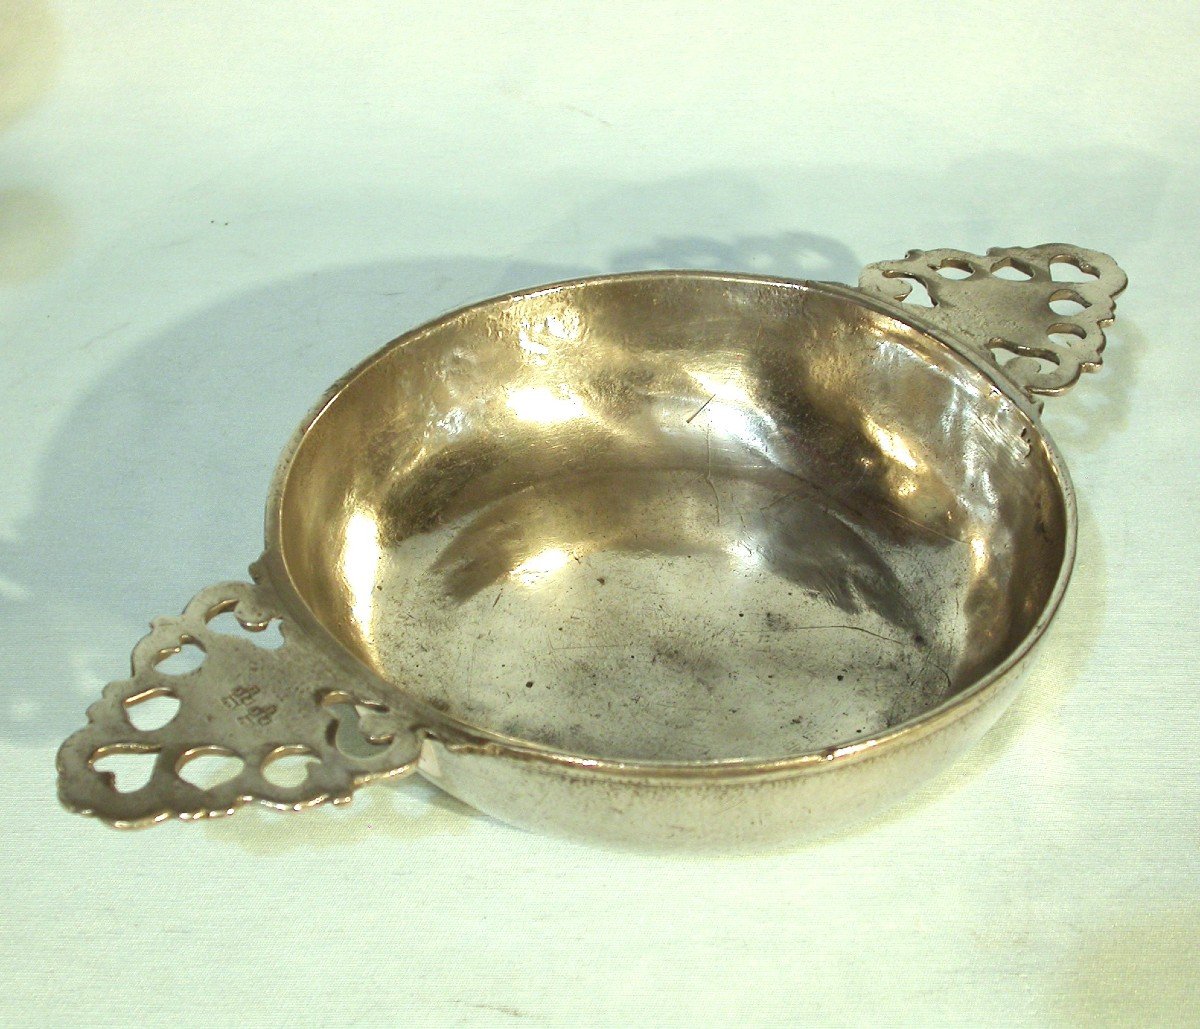 Rare Pewter Bowl From Salins-les-bains, 18th Century-photo-1